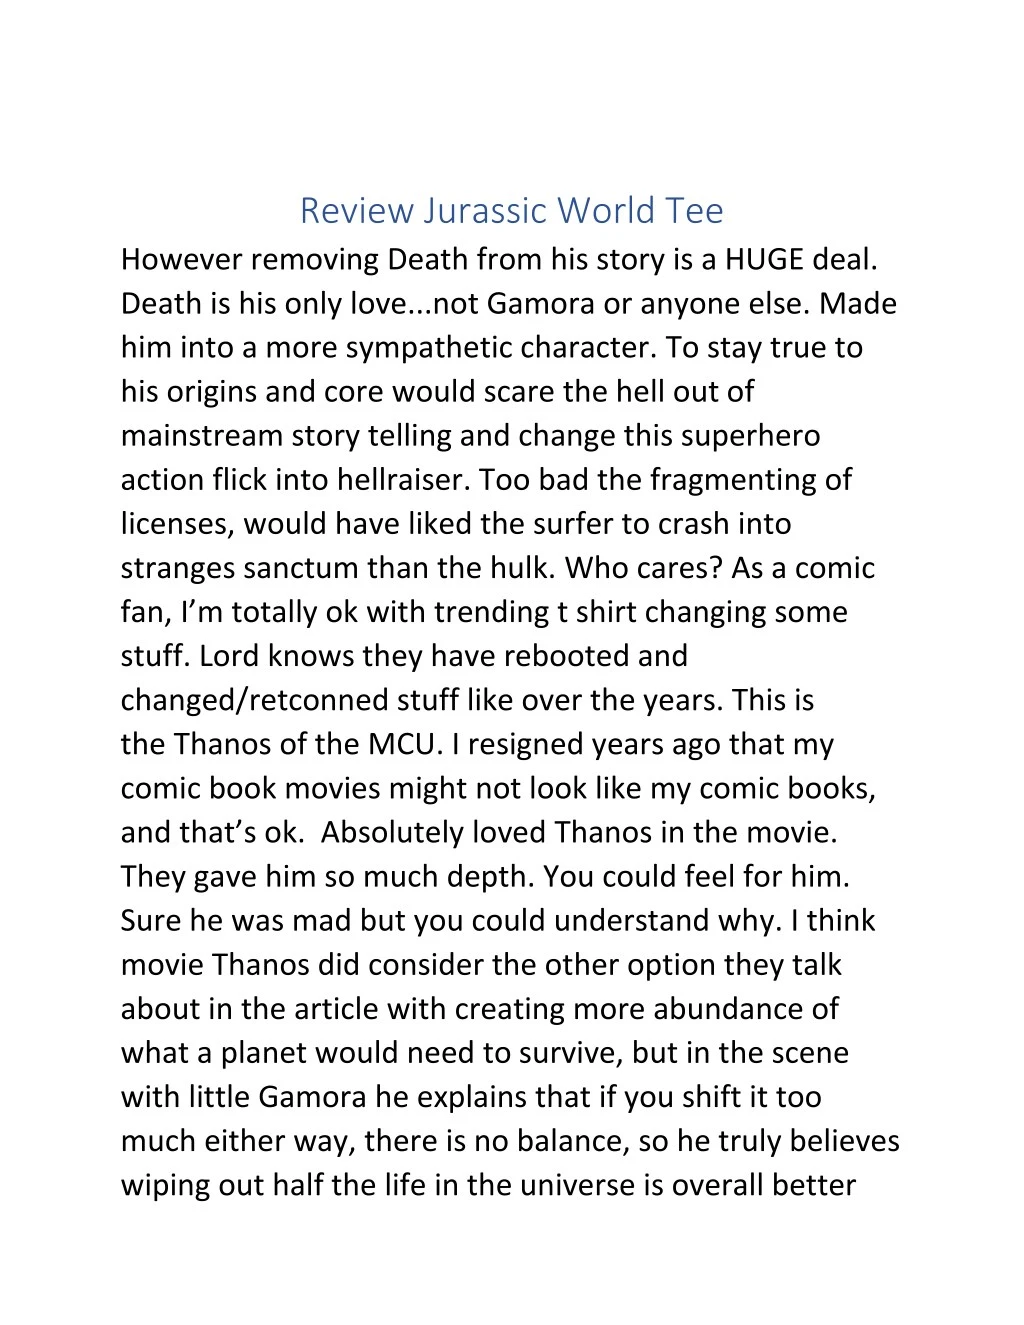 review jurassic world tee however removing death